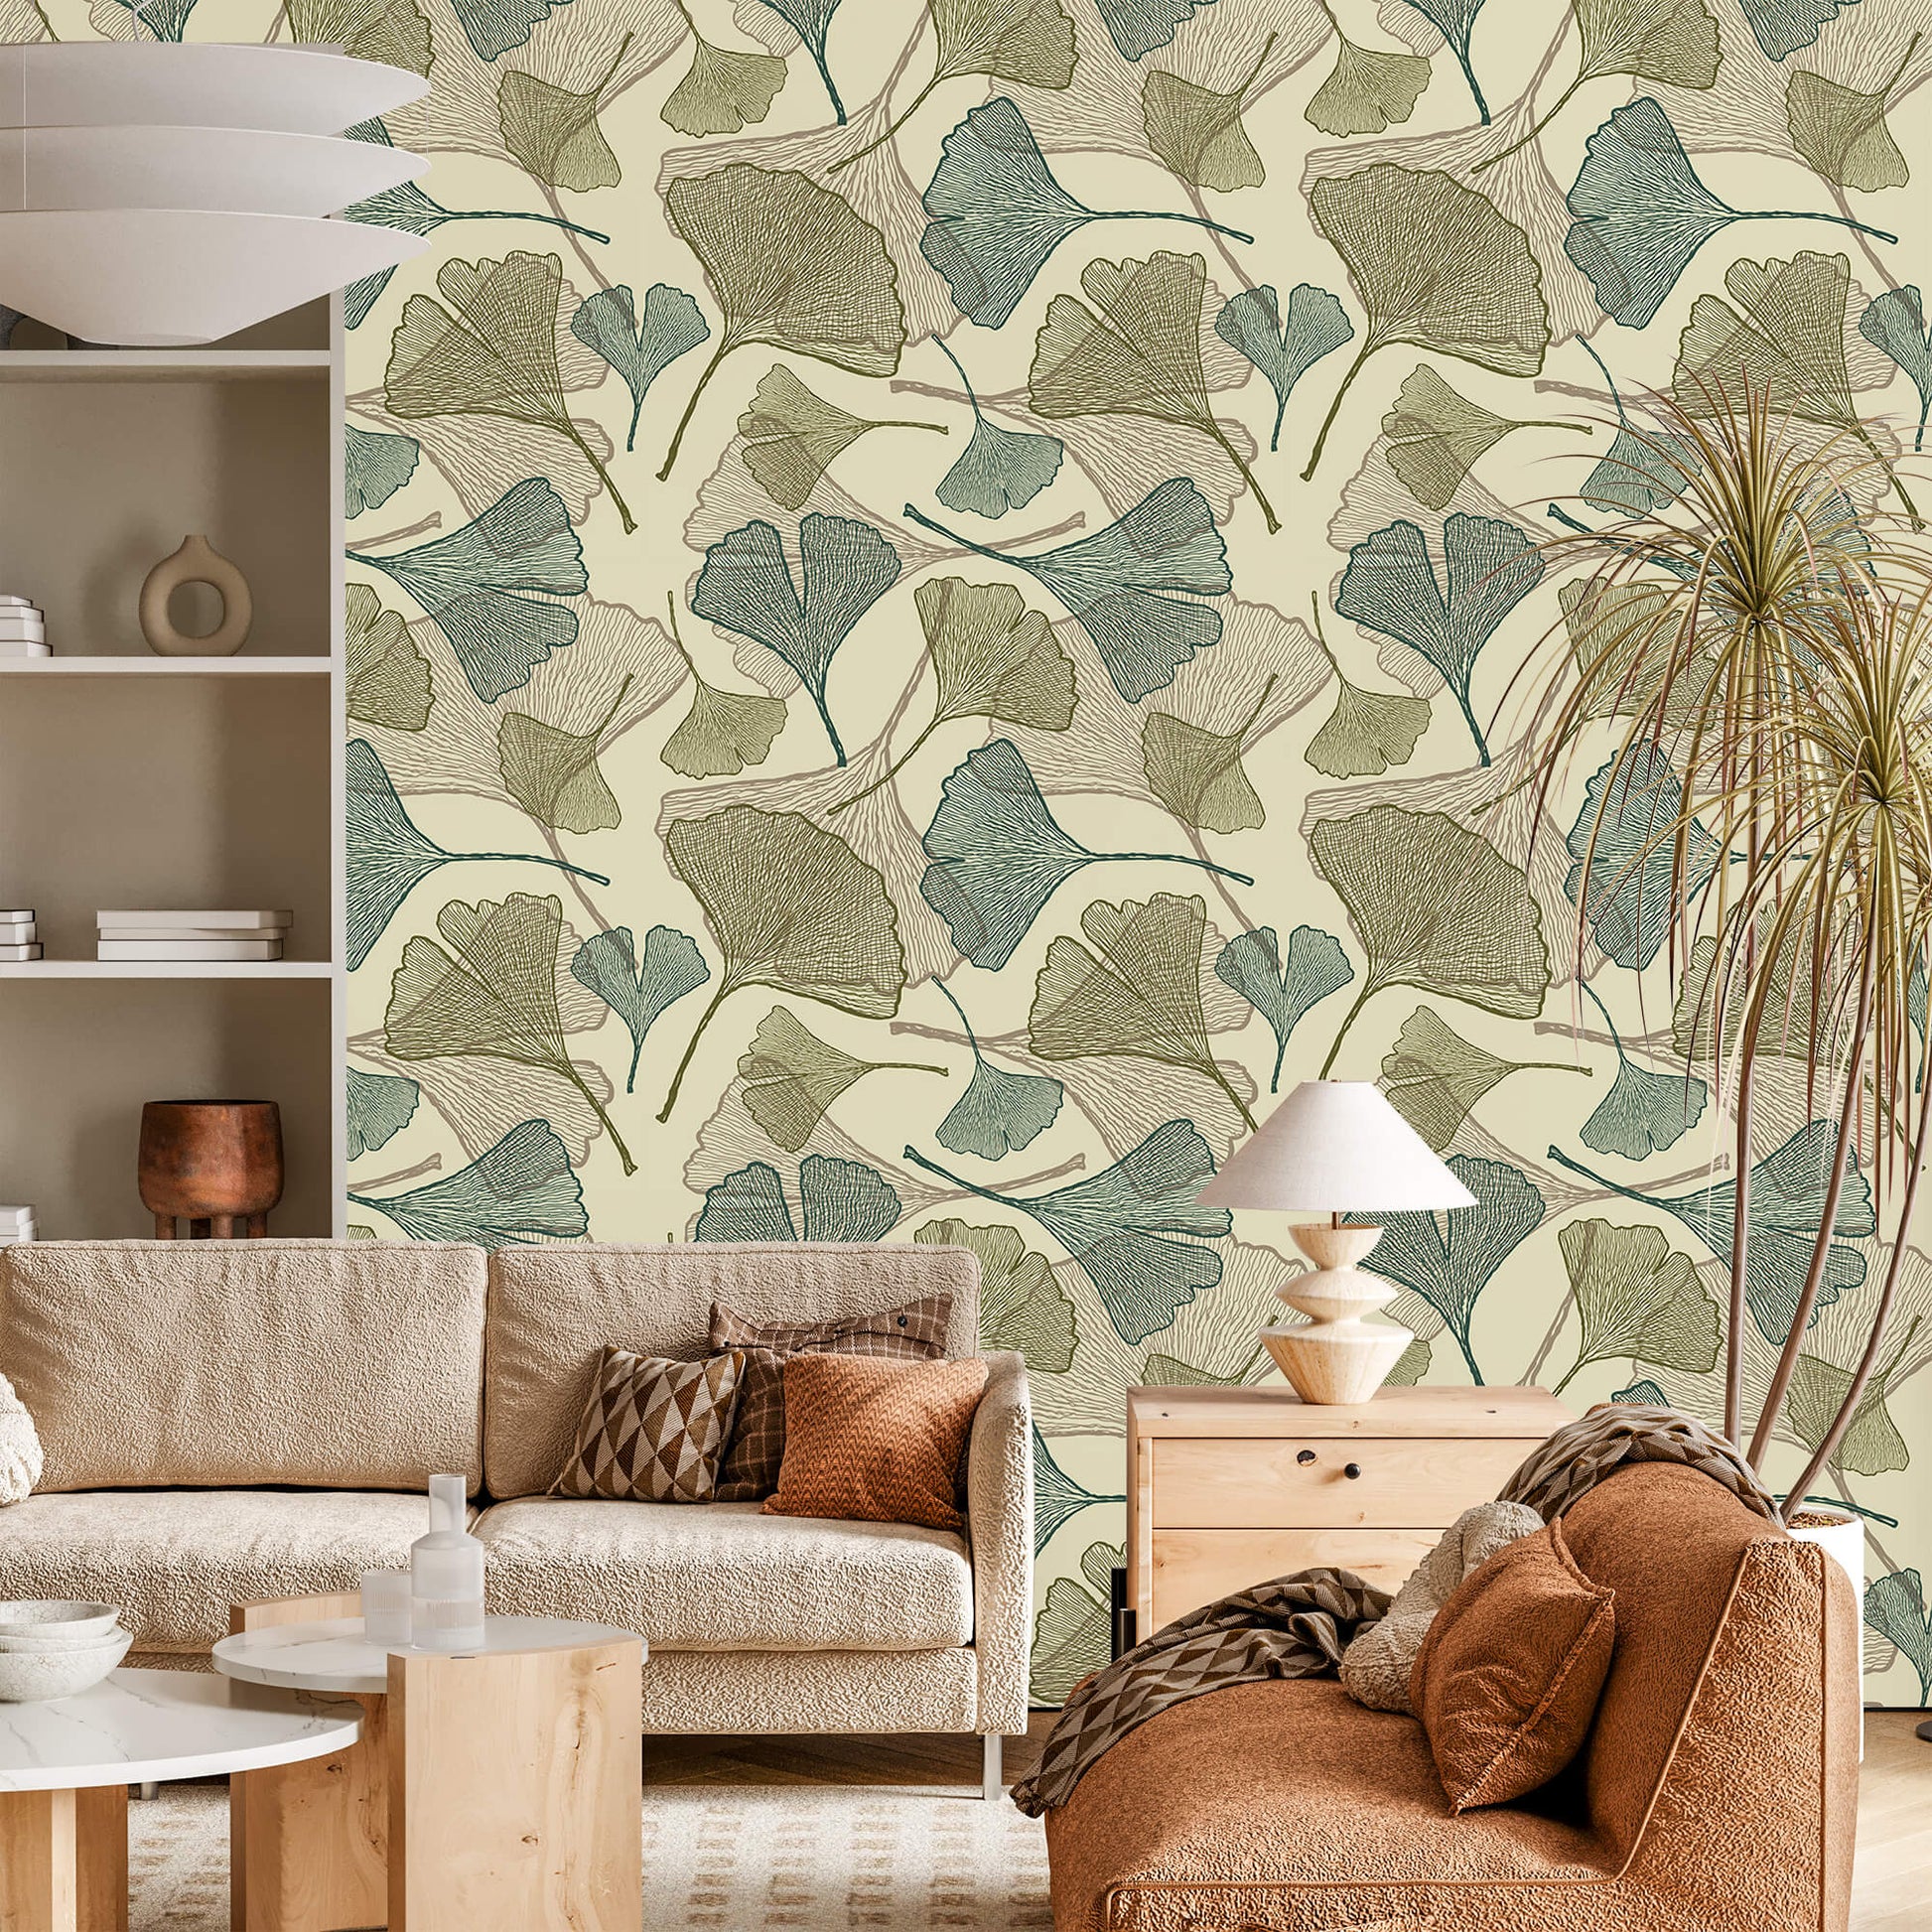 Ginkgo Serenity Wallpaper: Embrace tranquility with this elegant design, featuring delicate ginkgo leaves that exude serenity and grace, perfect for creating a peaceful ambiance in your space.